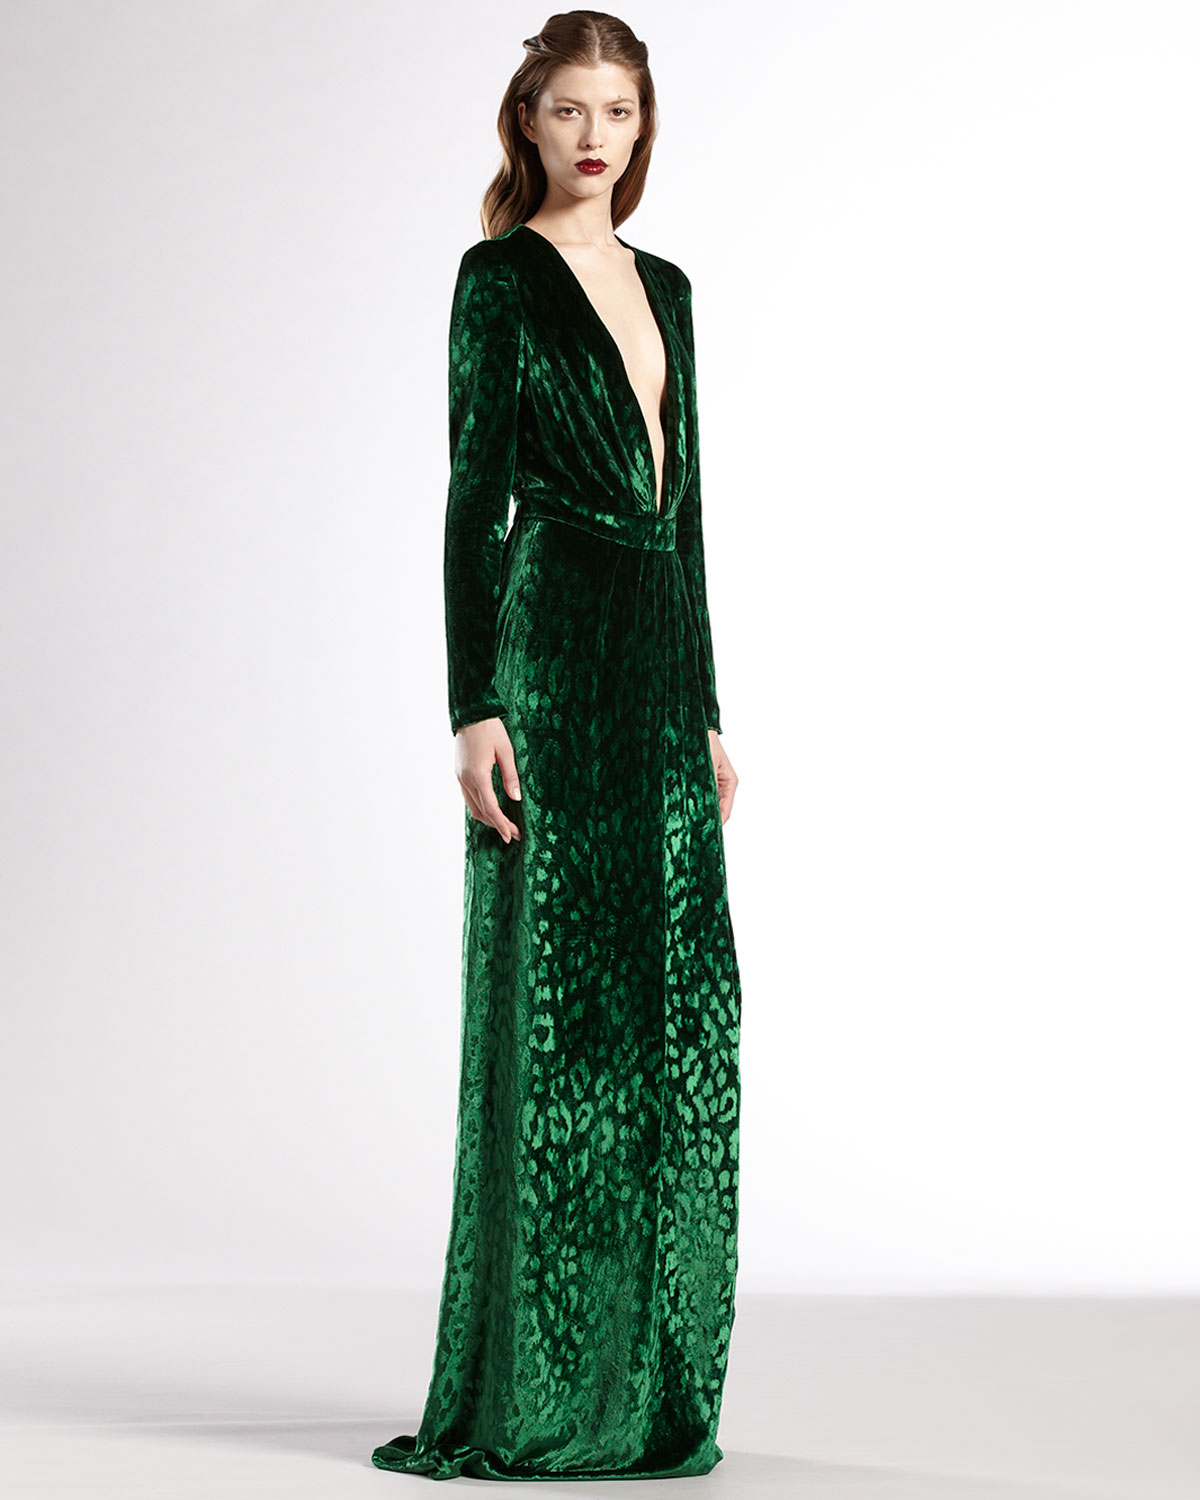 Gucci Gown Dresses Store, 56% OFF | www ...